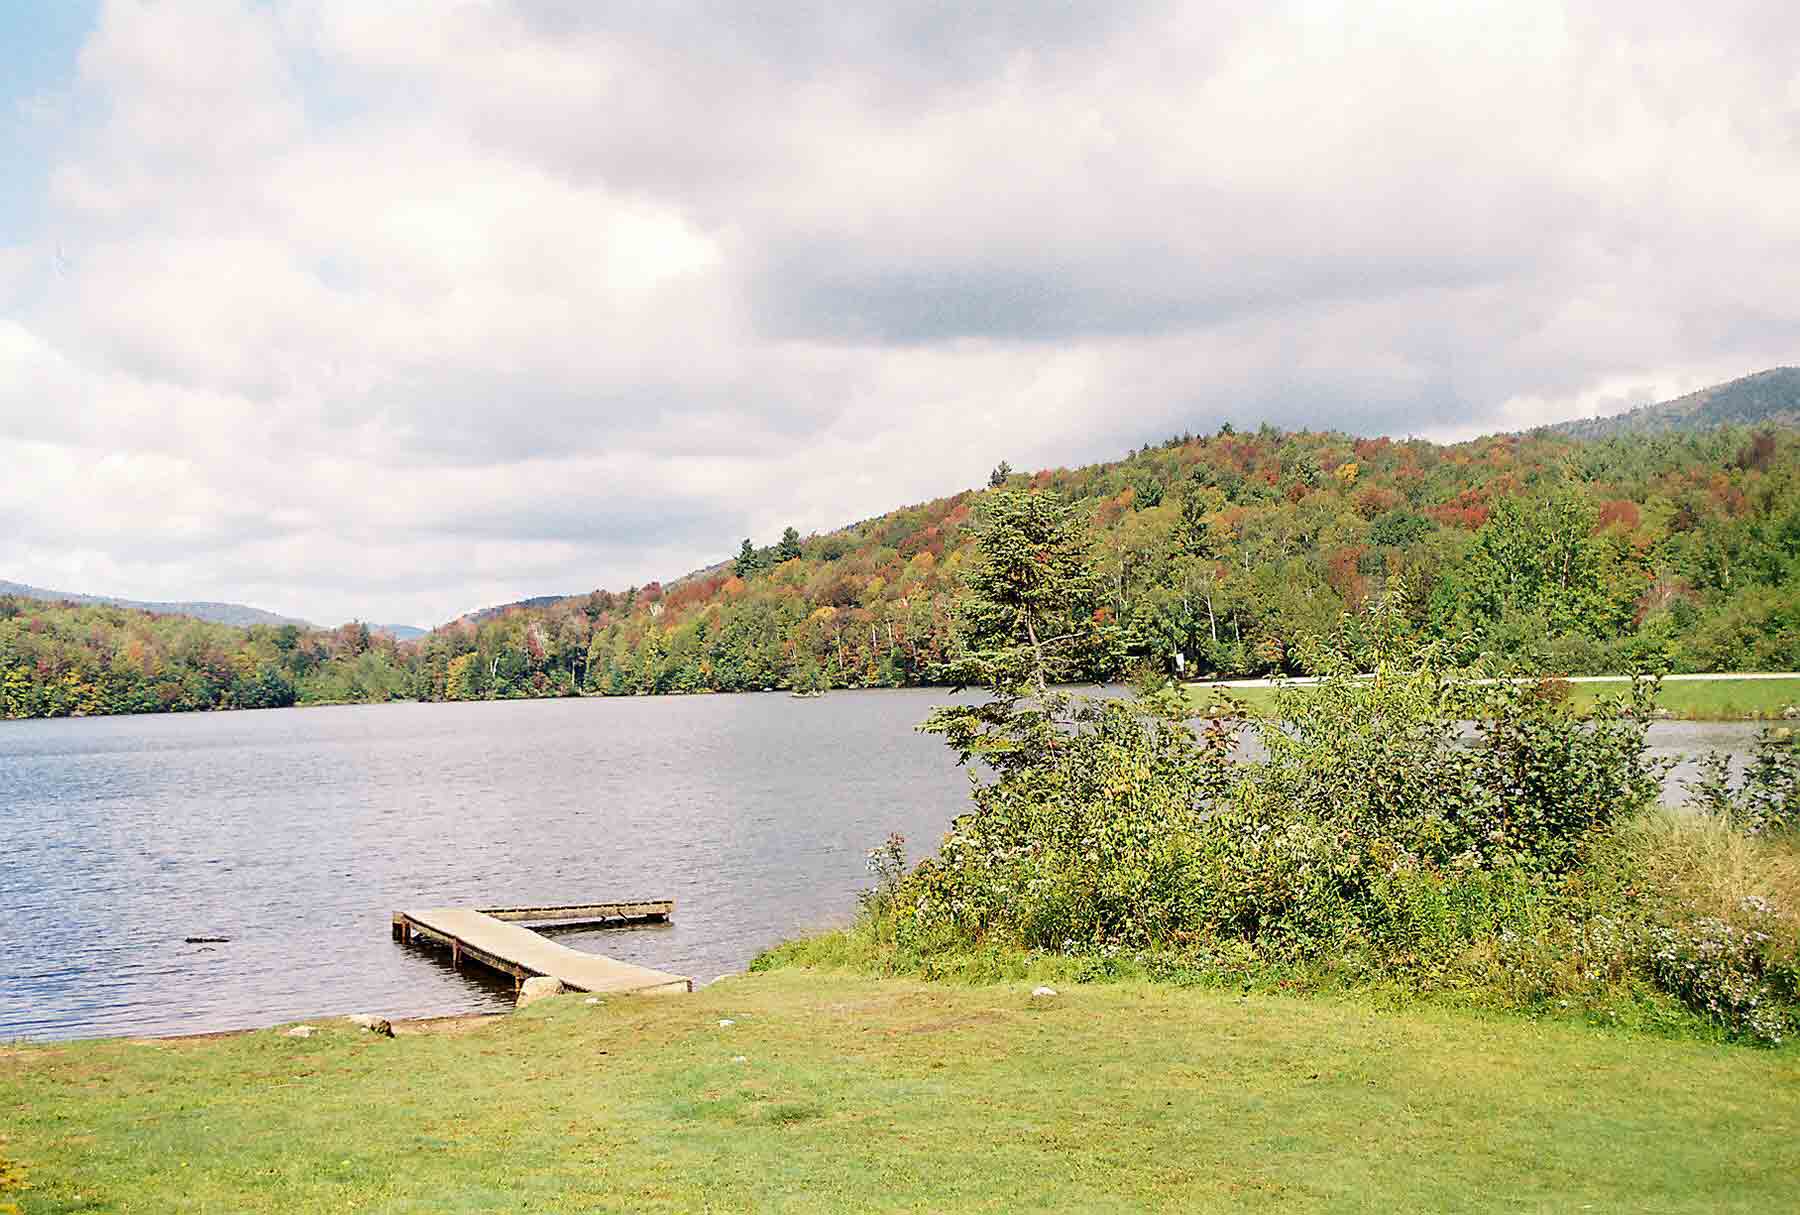 mm 19.7 - Looking north across Kent Pond. The AT runs along the south shore at one point crossing the lawn of Mountain Meadows Lodge. The little dock is for canoes used by their guests.  Courtesy dlcul@conncoll.edu